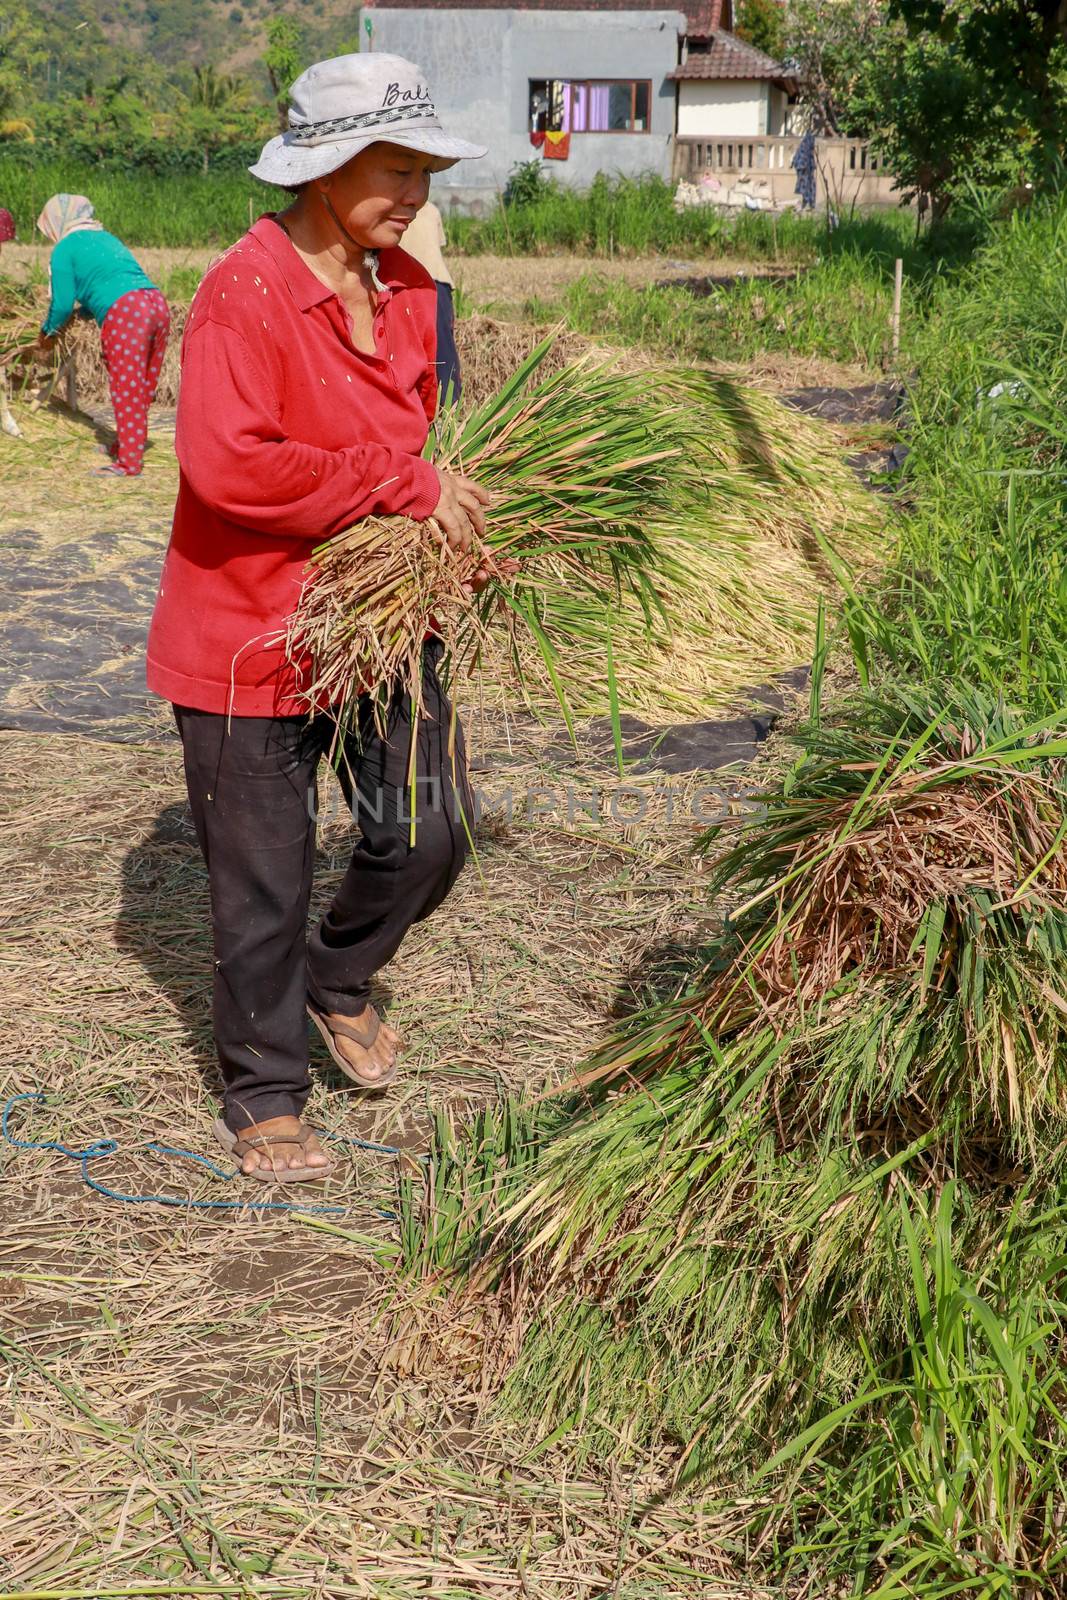 Female workers harvesting rice. Bali, Indonesia. Middle aged woman with white hat harvested rice.